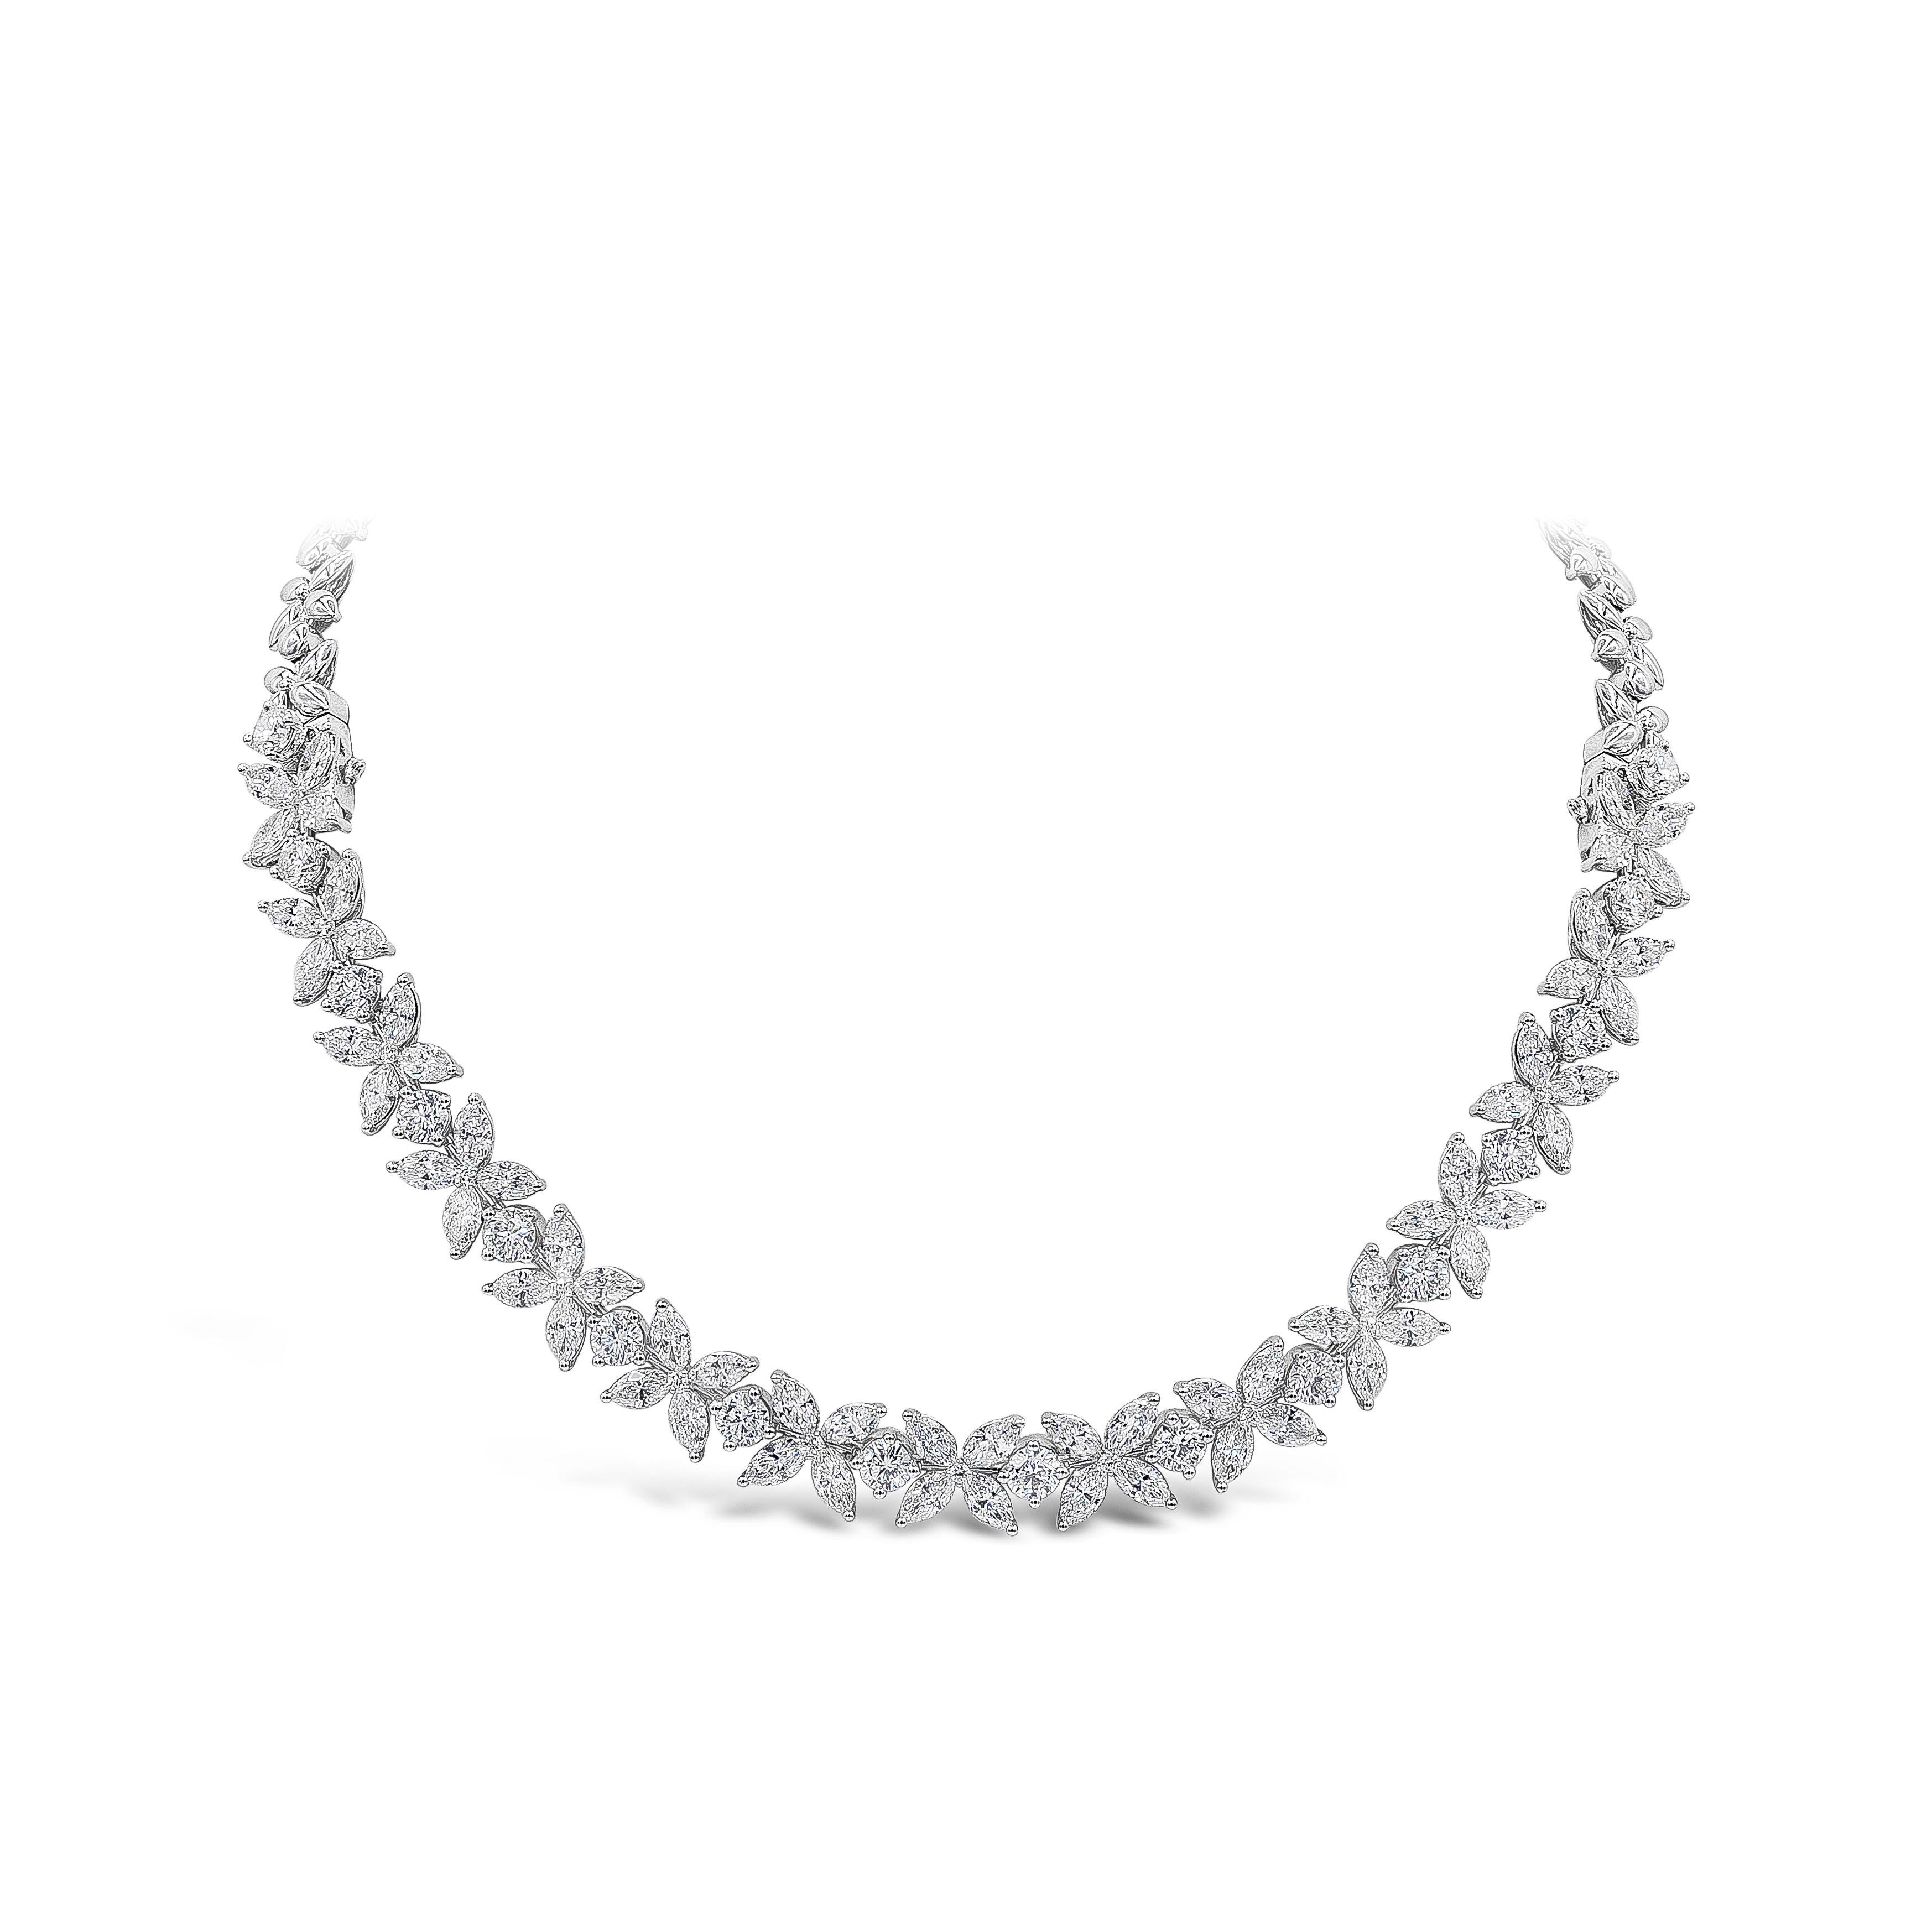 A beautiful floral motif necklace that can be disassembled to two flower bracelets. Showcases a cluster of marquise and round brilliant diamonds, set half-way throughout the necklace. Made in 18K white gold. Diamonds weighs 16.92 carats